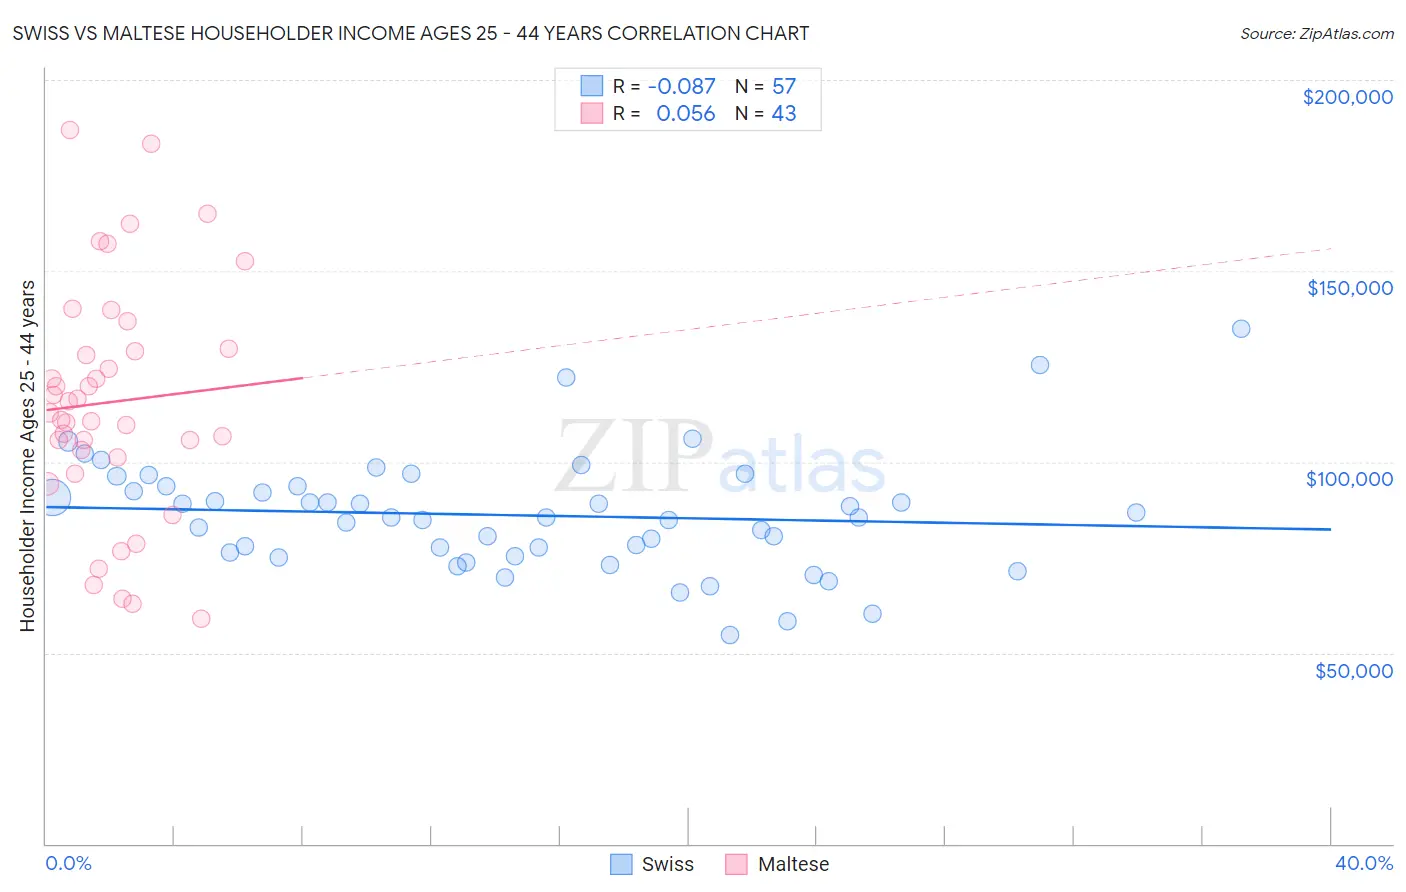 Swiss vs Maltese Householder Income Ages 25 - 44 years